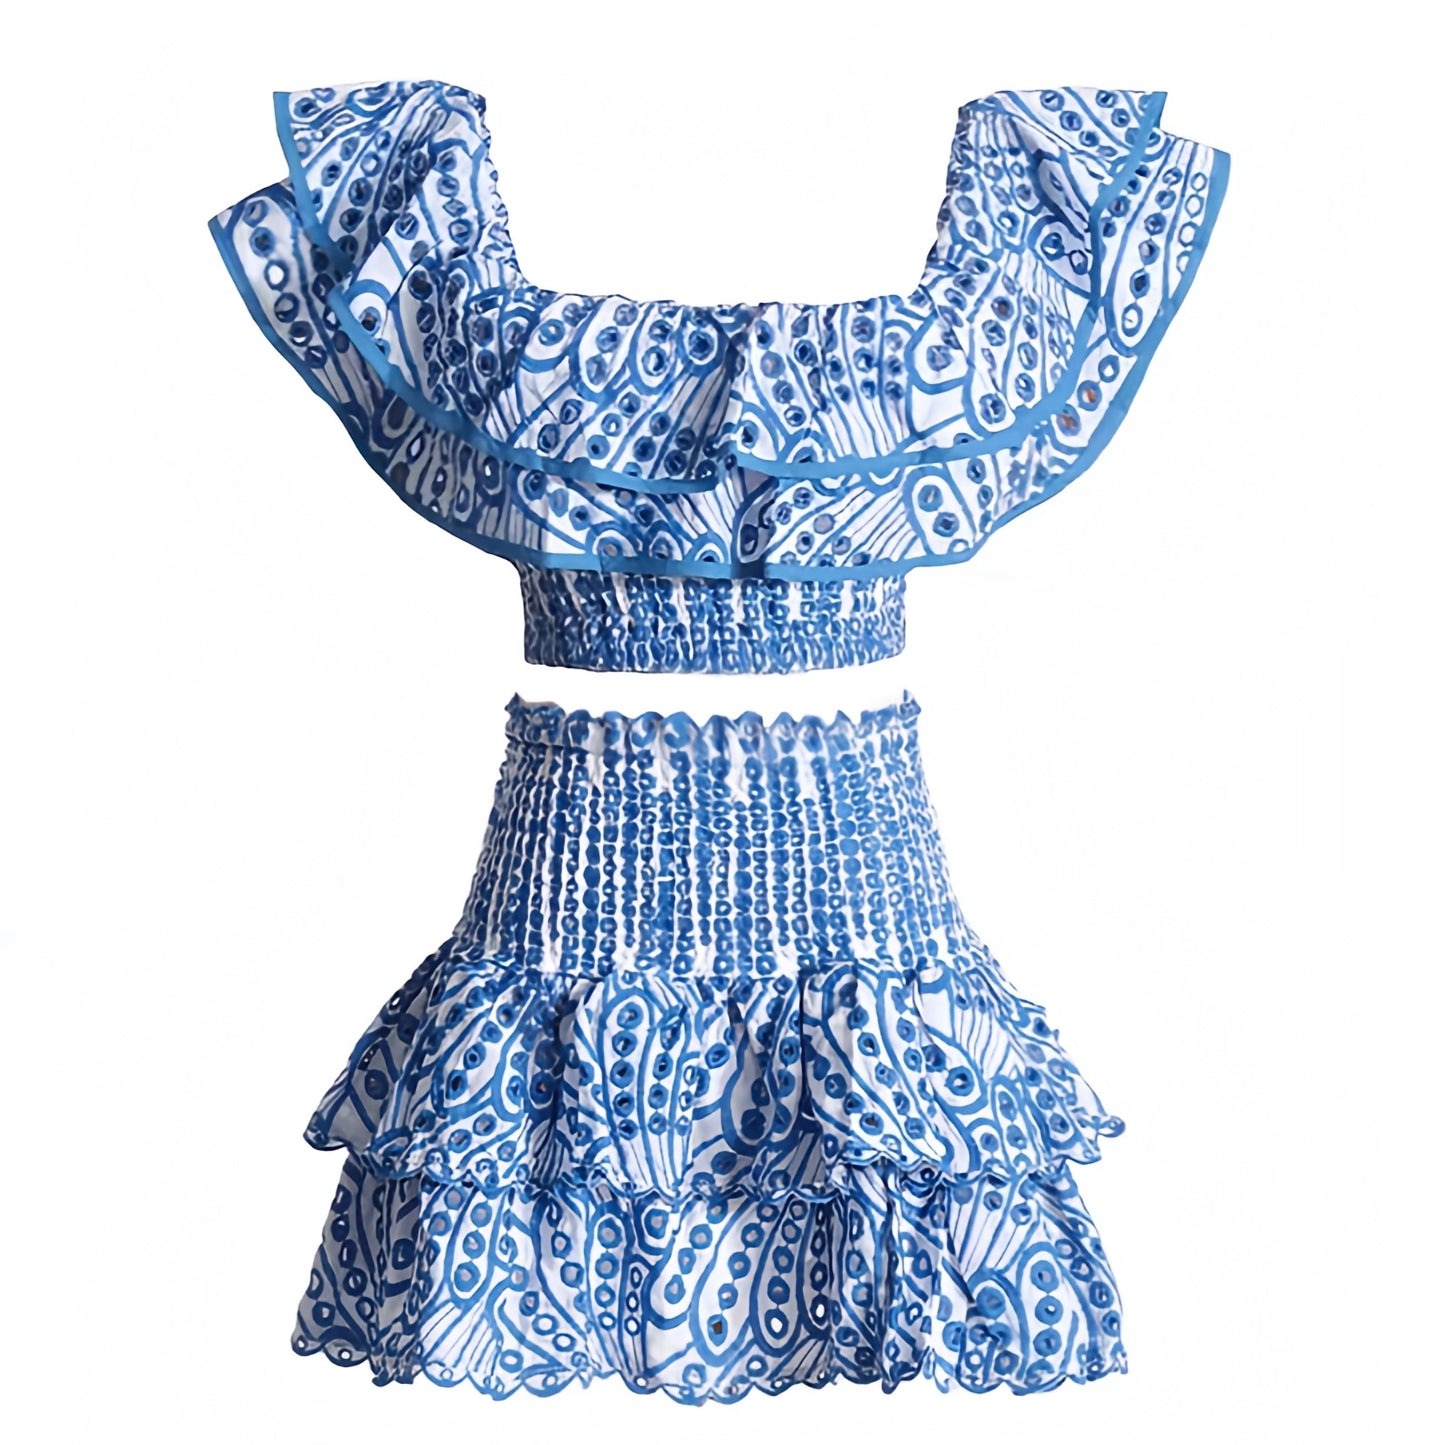 blue-and-white-eyelet-embroidered-striped-scalloped-broderie-anglaise-patterned-layered-ruffle-smocked-tiered-shirred-bodice-fitted-waist-bodycon-slim-fit-short-sleeve-off-shoulder-square-neck-line-crop-top-blouse-mini-skirt-2-piece-dress-set-couture-women-ladies-spring-2024-summer-chic-trendy-elegant-casual-semi-formal-feminine-classy-preppy-style-party-prom-european-beach-wear-vacation-sundress-coastal-granddaughter-gown-charo-ruiz-zimmerman-revolve-loveshackfancy-fillyboo-cb-positano-dupe